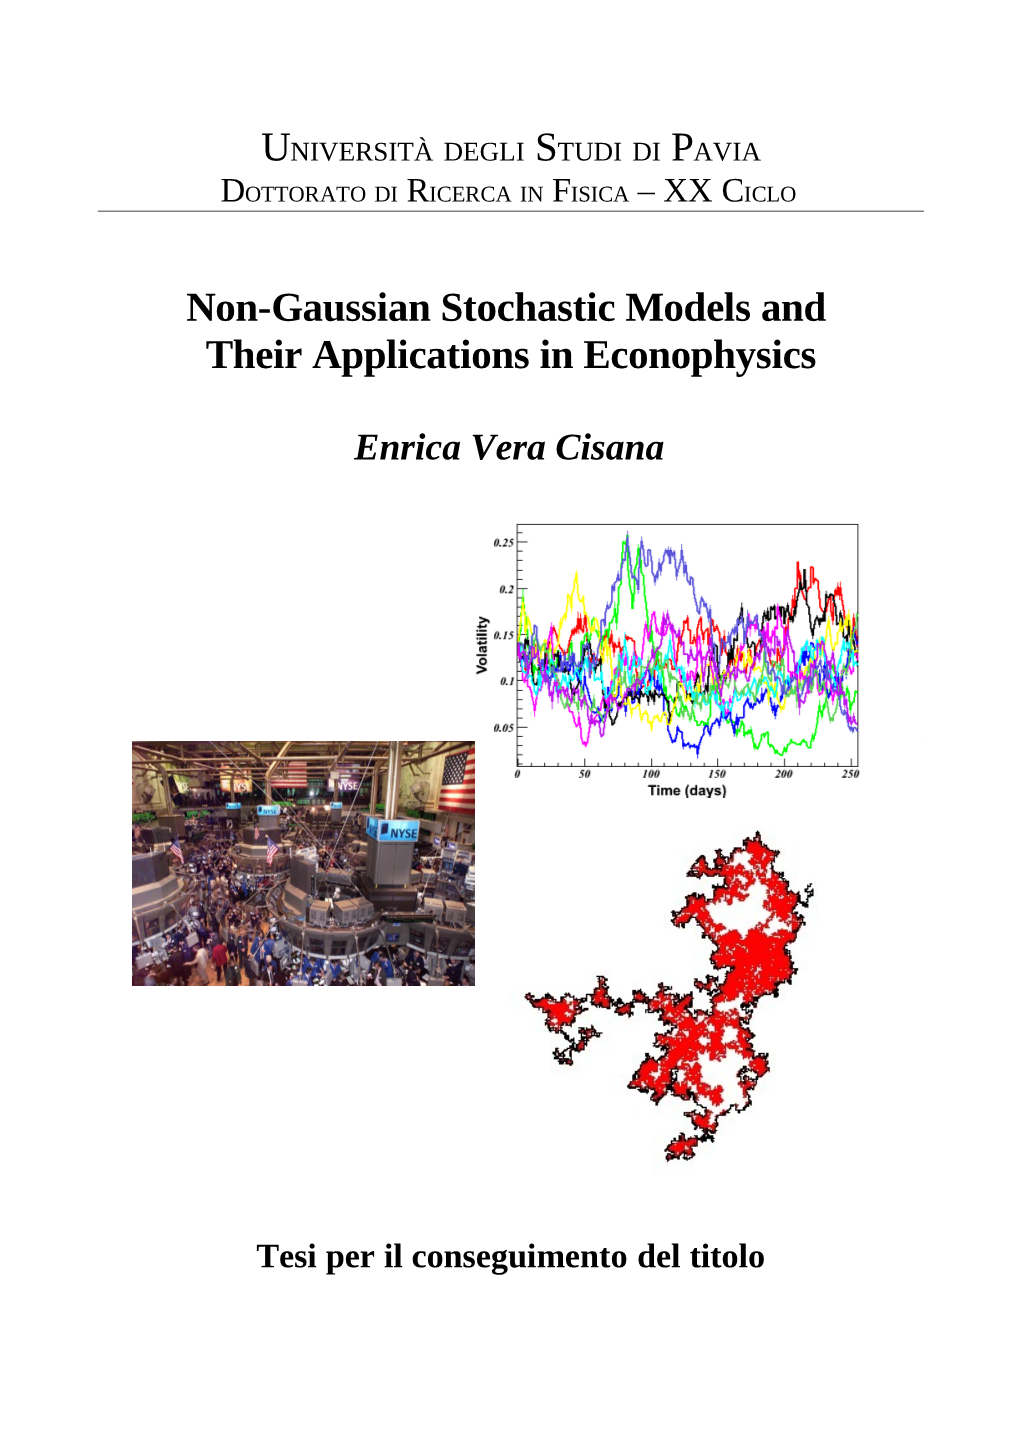 Non-Gaussian Stochastic Models and Their Applications in Econophysics